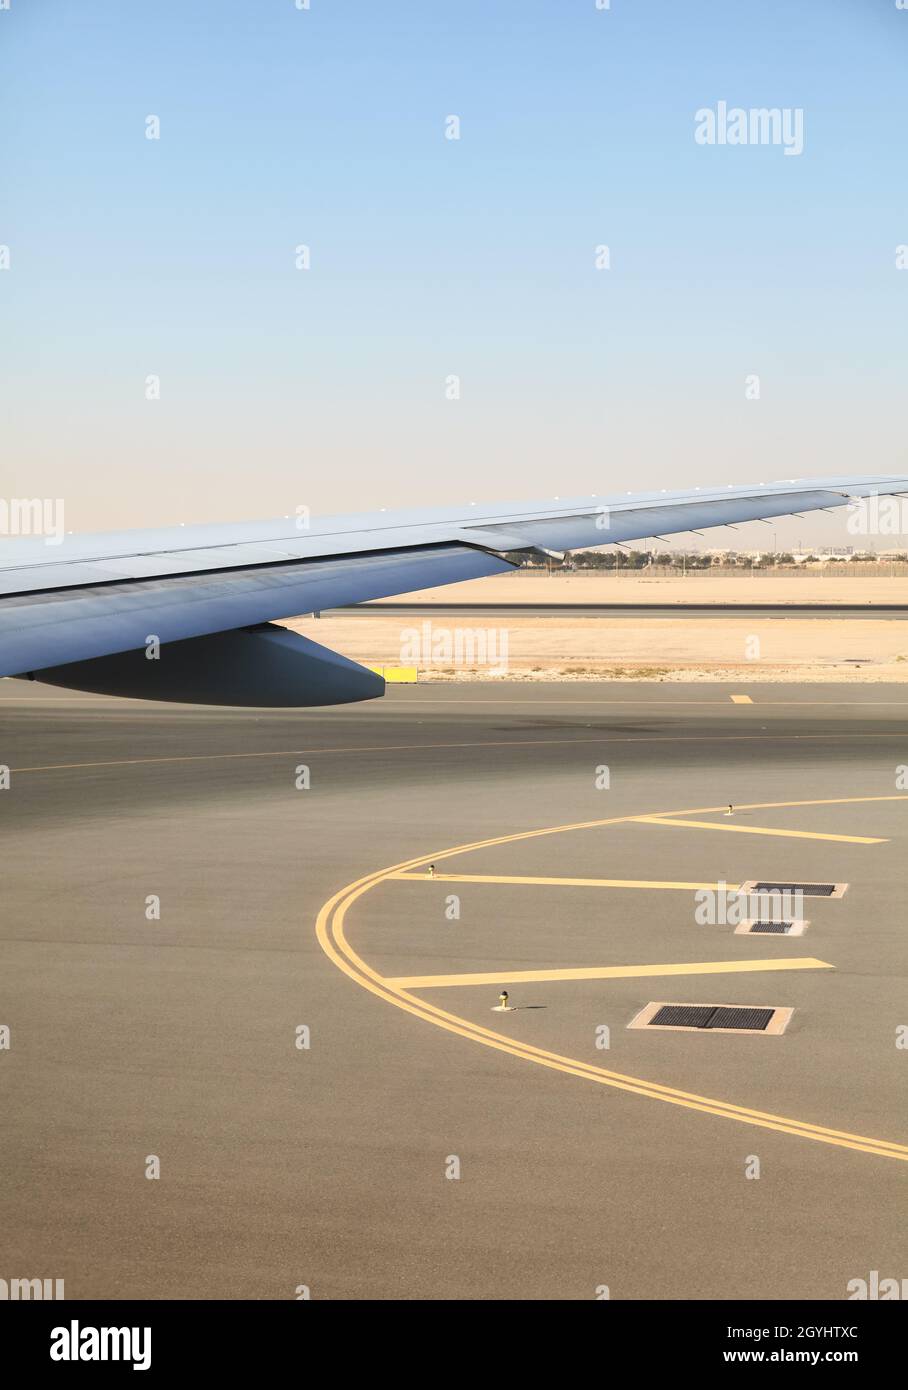 Wing of a plane during takeoff. Stock Photo